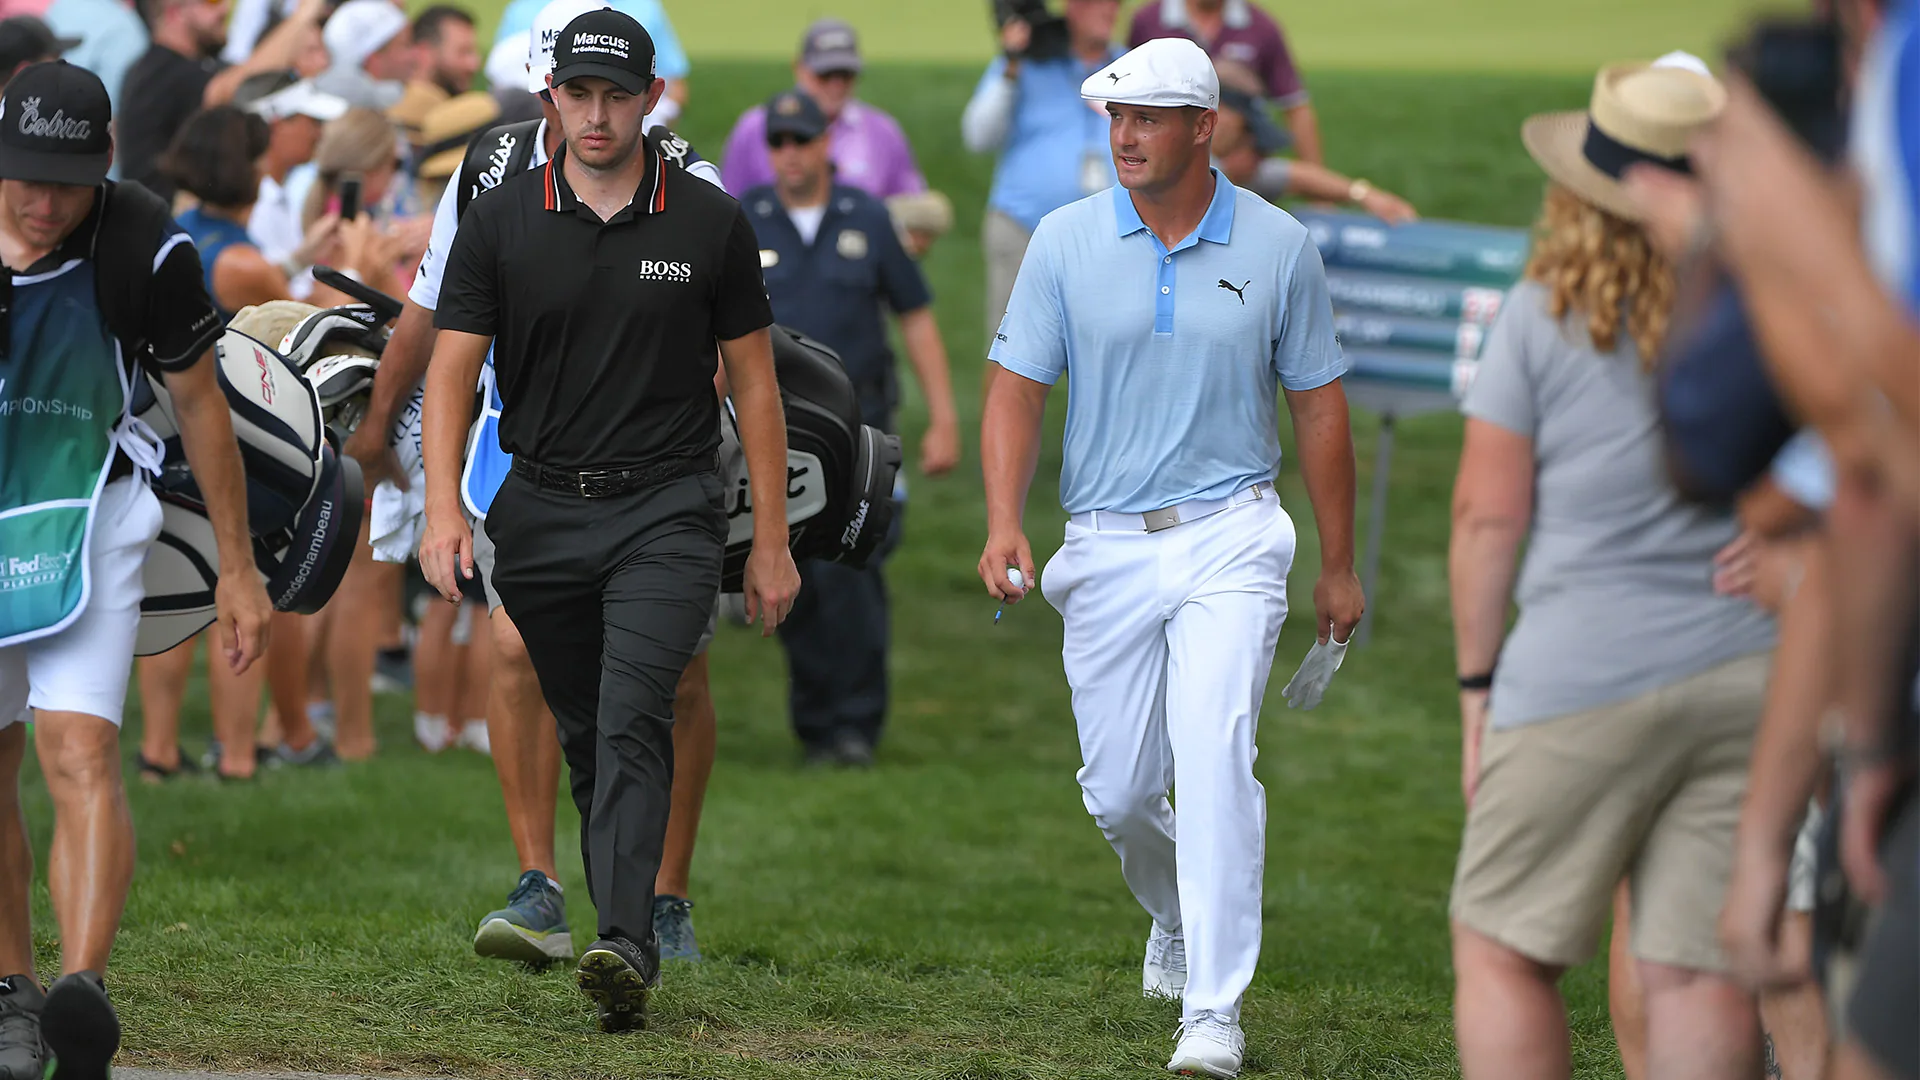 Bryson DeChambeau and Patrick Cantlay battle for Day 3 BMW Championship lead